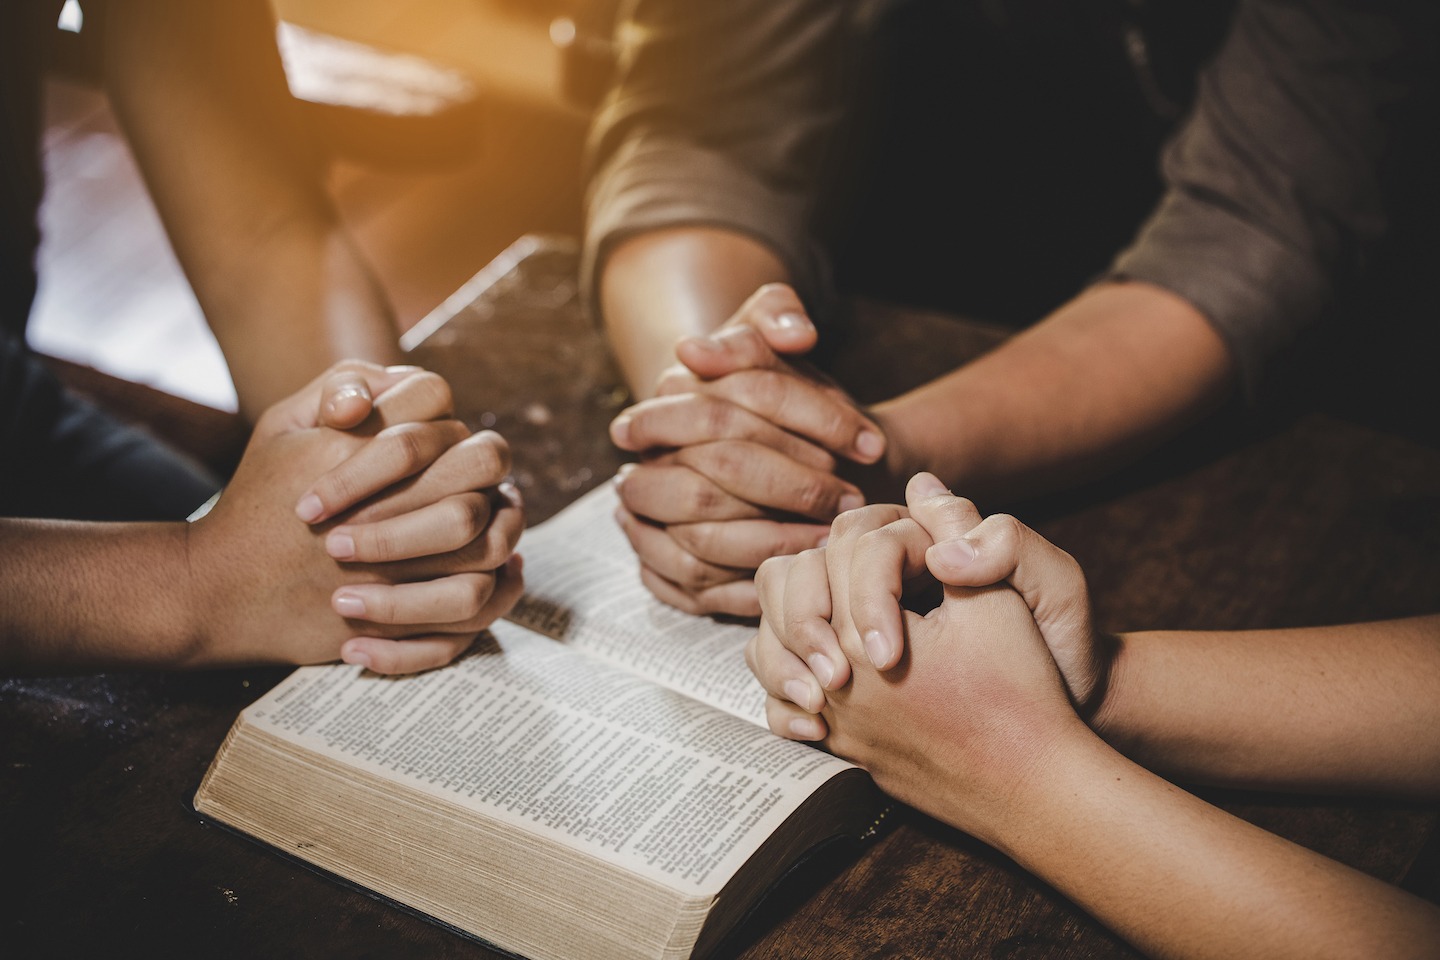 Stock photo of people praying together around a bible